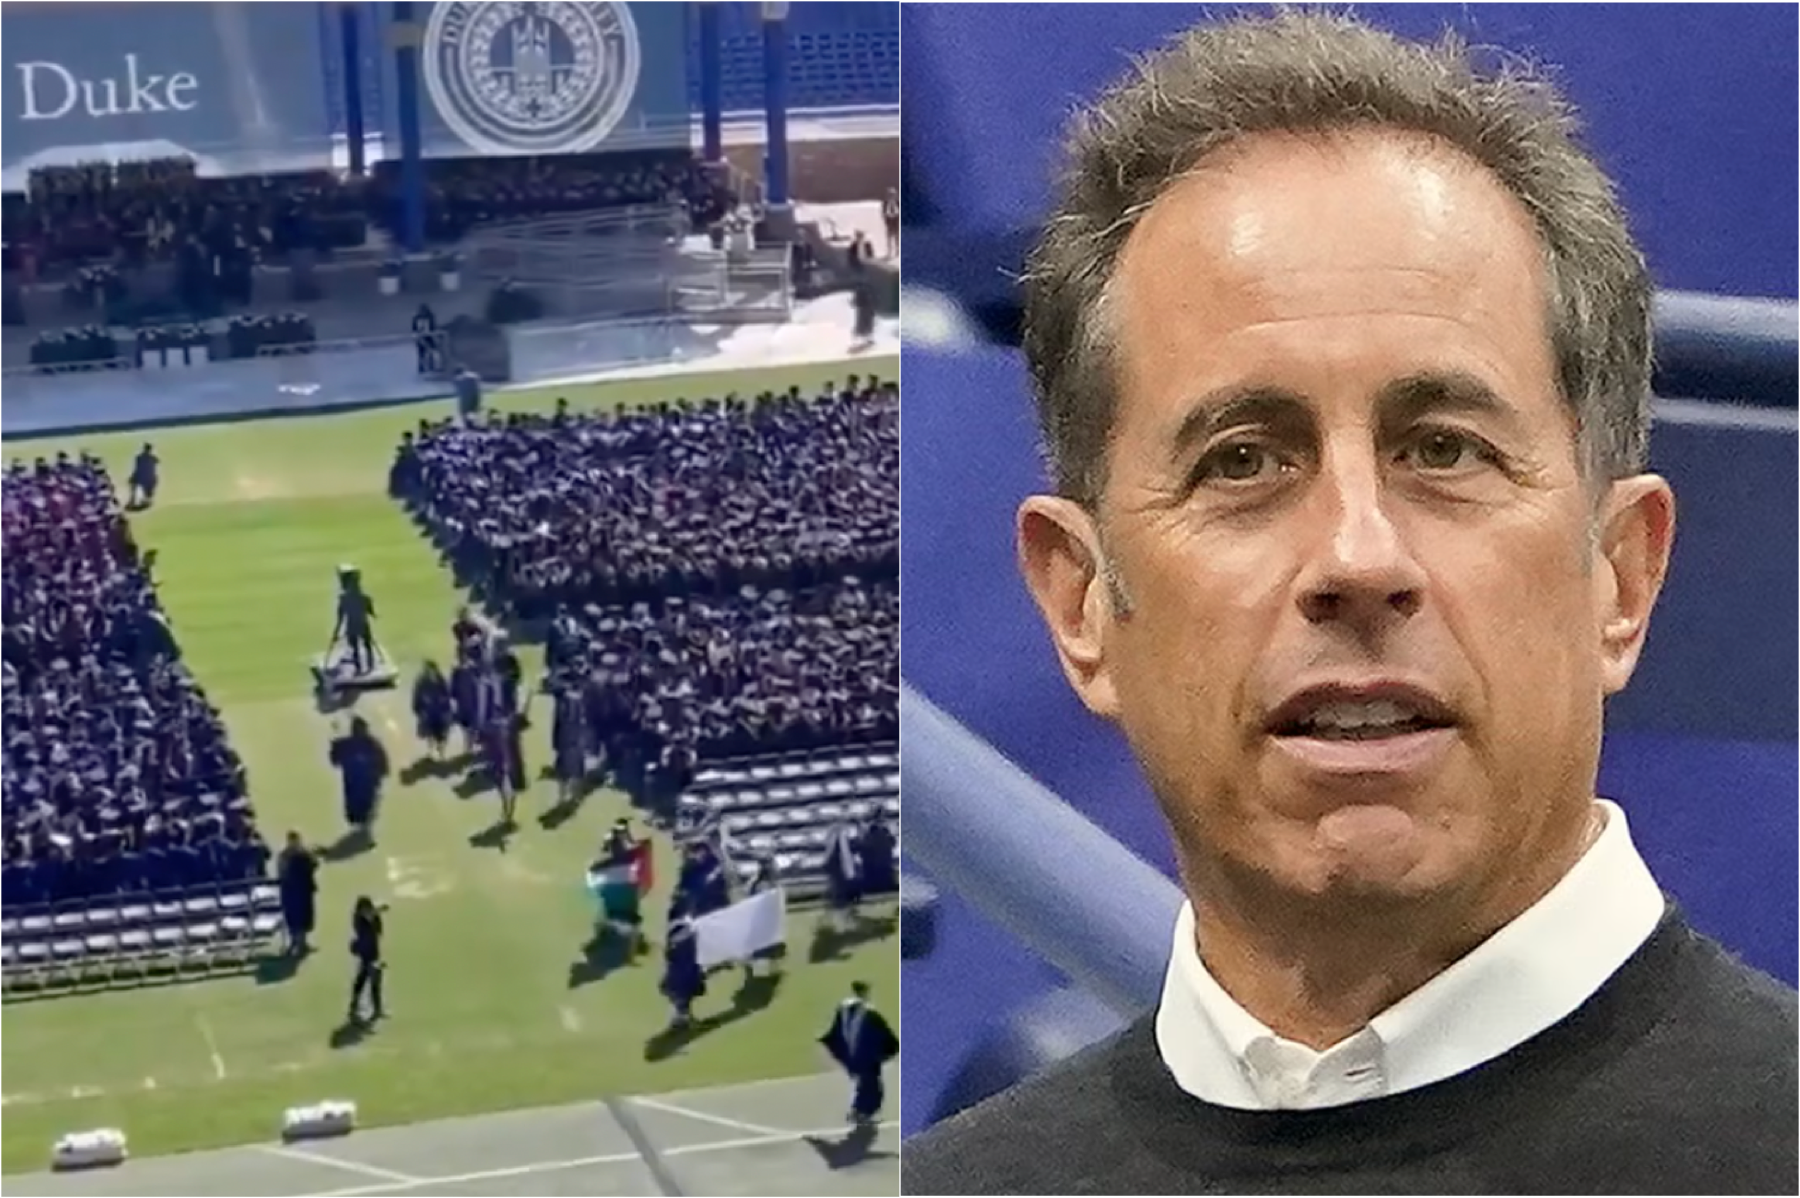 Dozens of students walked out as Jerry Seinfeld delivered the commencement speech at Duke University on Sunday